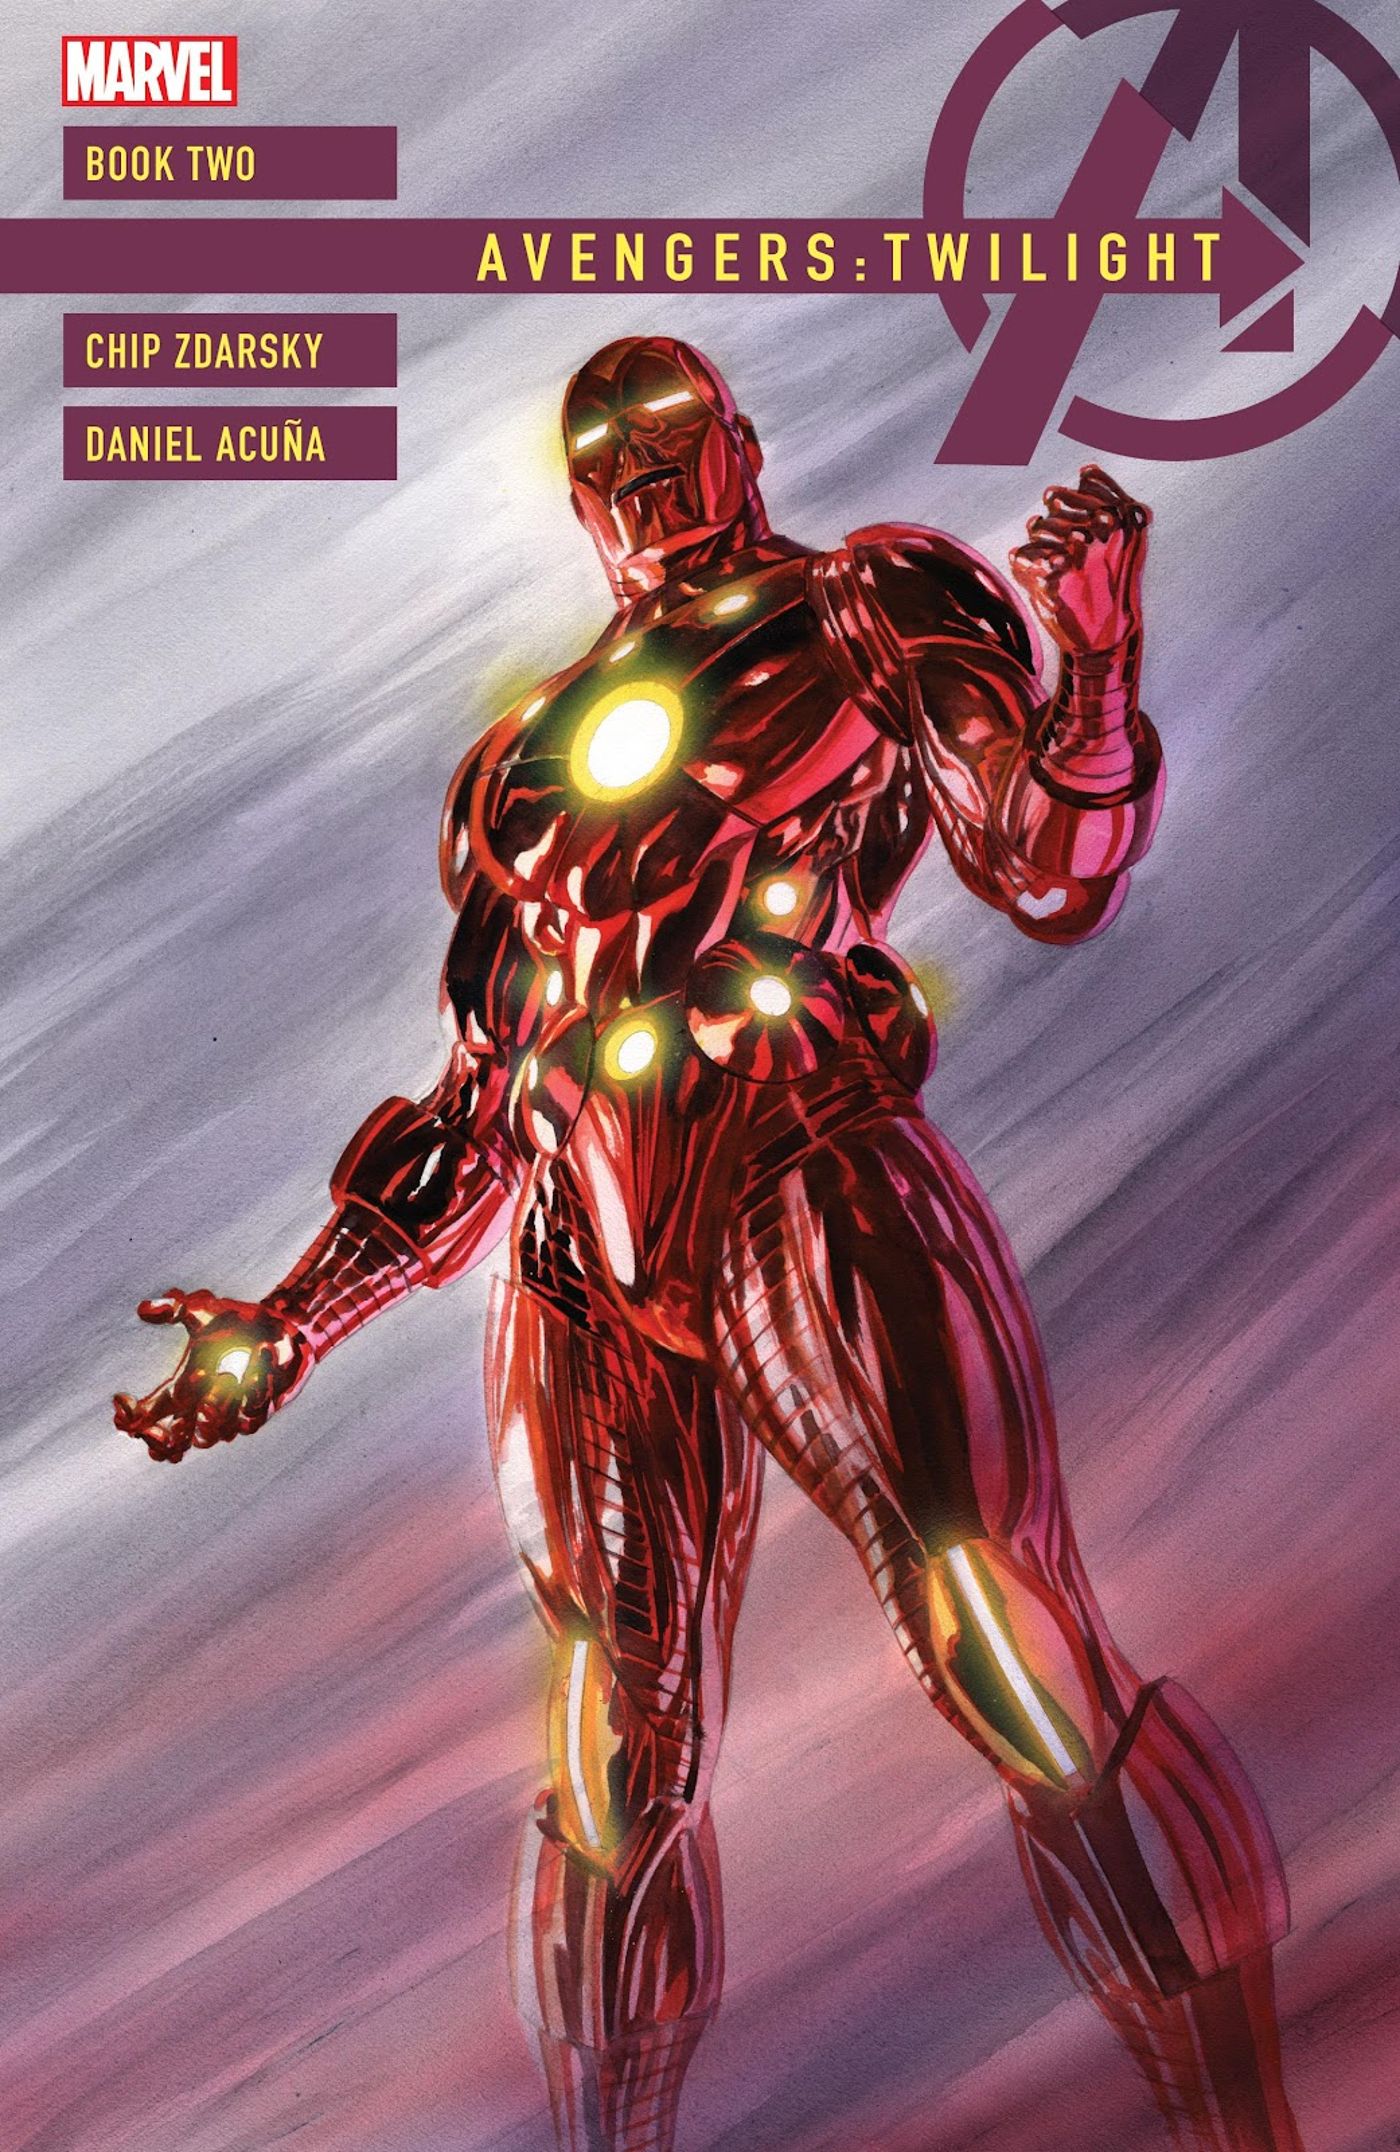 Avengers: Twilight Iron Man stands in full suit in front of streaks of color. 